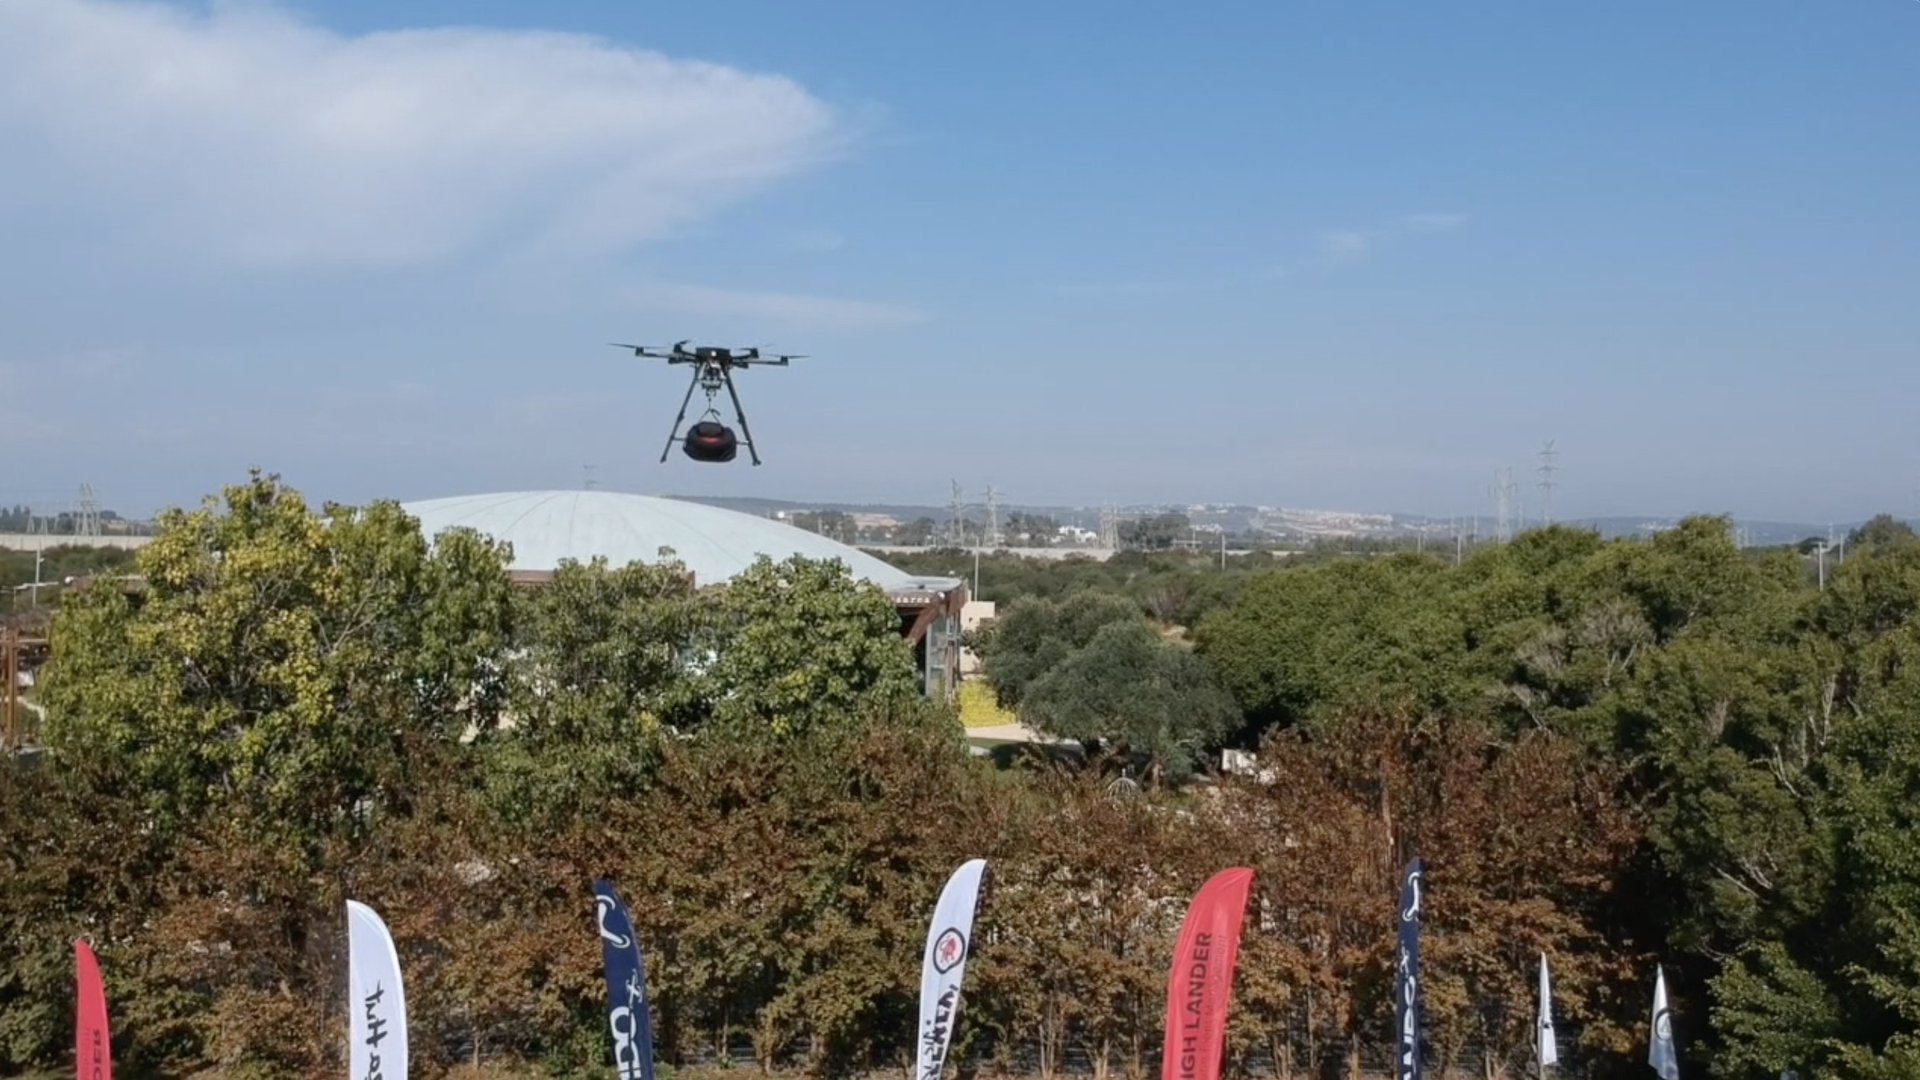 A drone delivers Pizza Hut orders over central Israel.